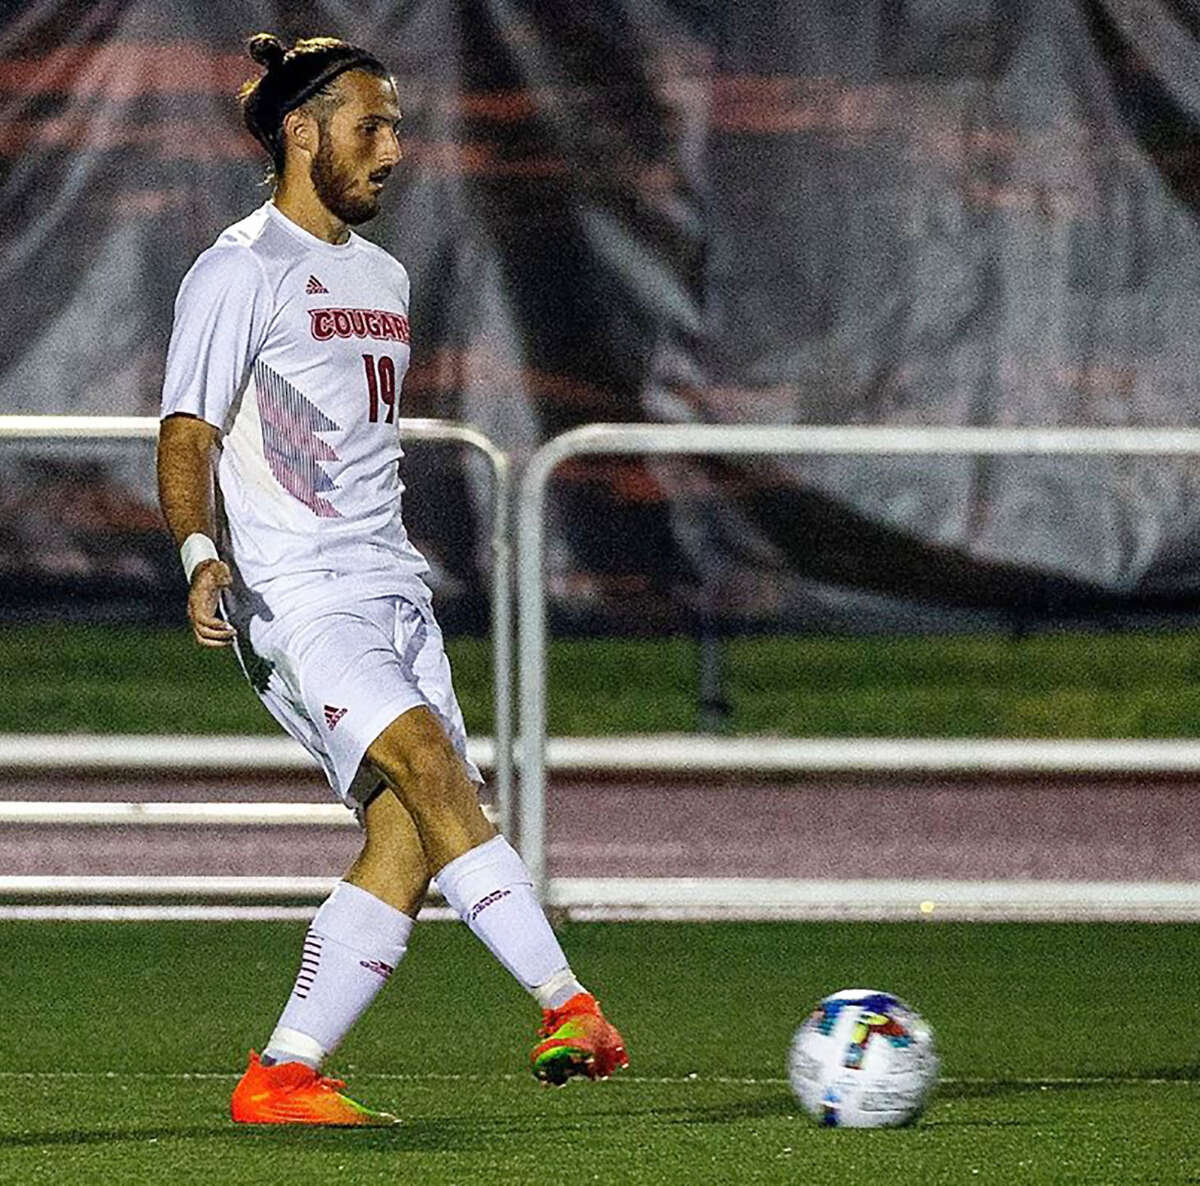 Ignacio Abeal Pou scored for SIUE Thursday night in a 3-1 loss to Loyola Marymount in Los Angeles. The game was the season opener for each team.